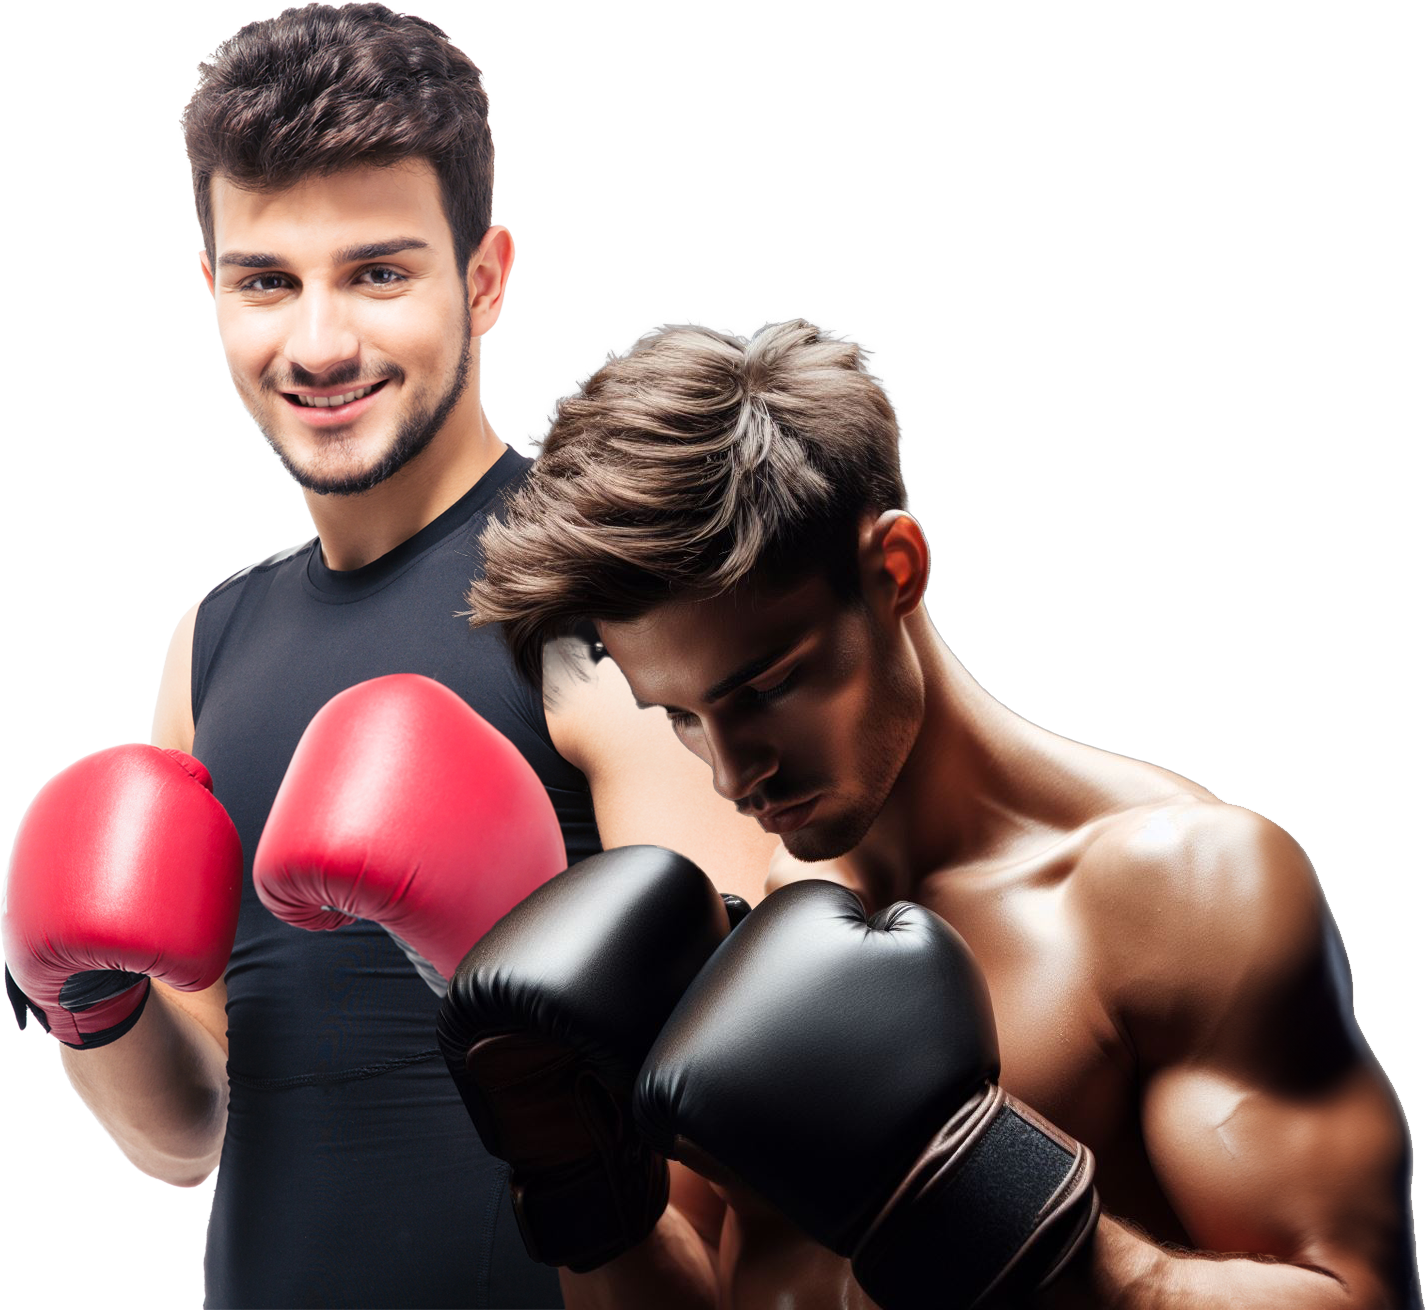 two men wearing boxing gloves are standing next to each other